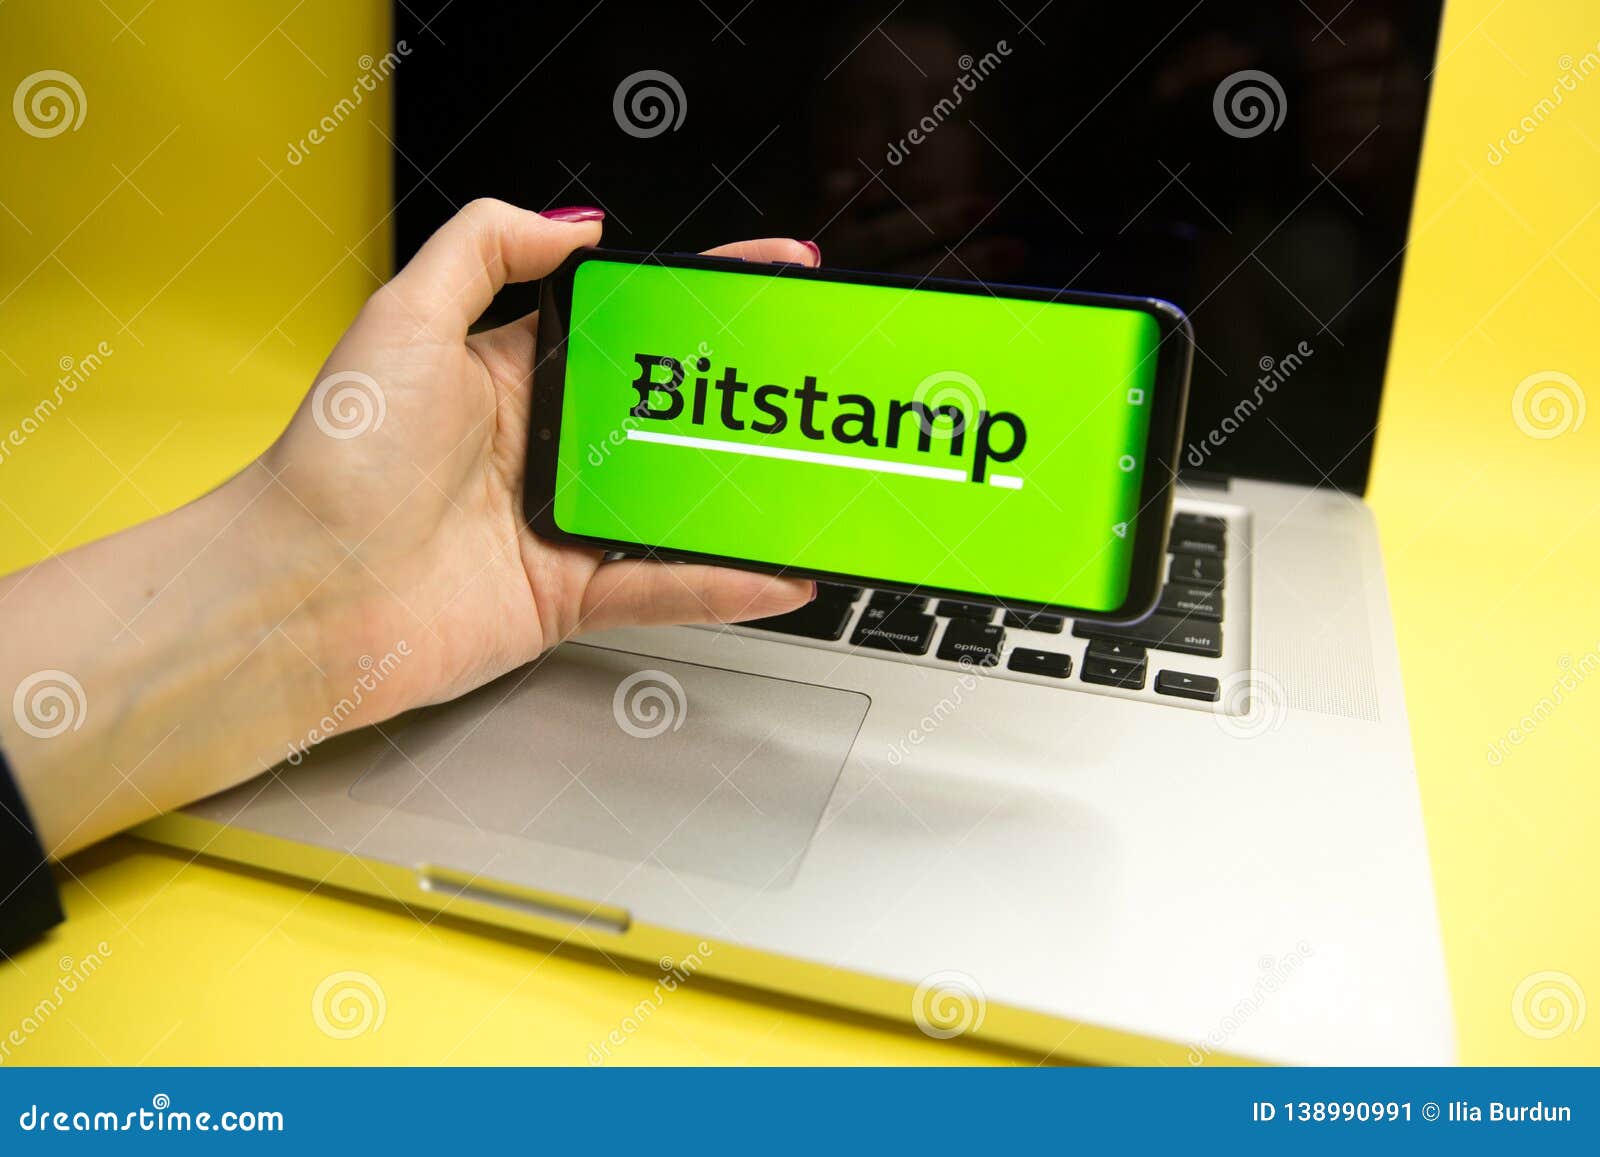 Tula, Russia - JANUARY 29, 2019: Bitstamp Cryptocurrency ...